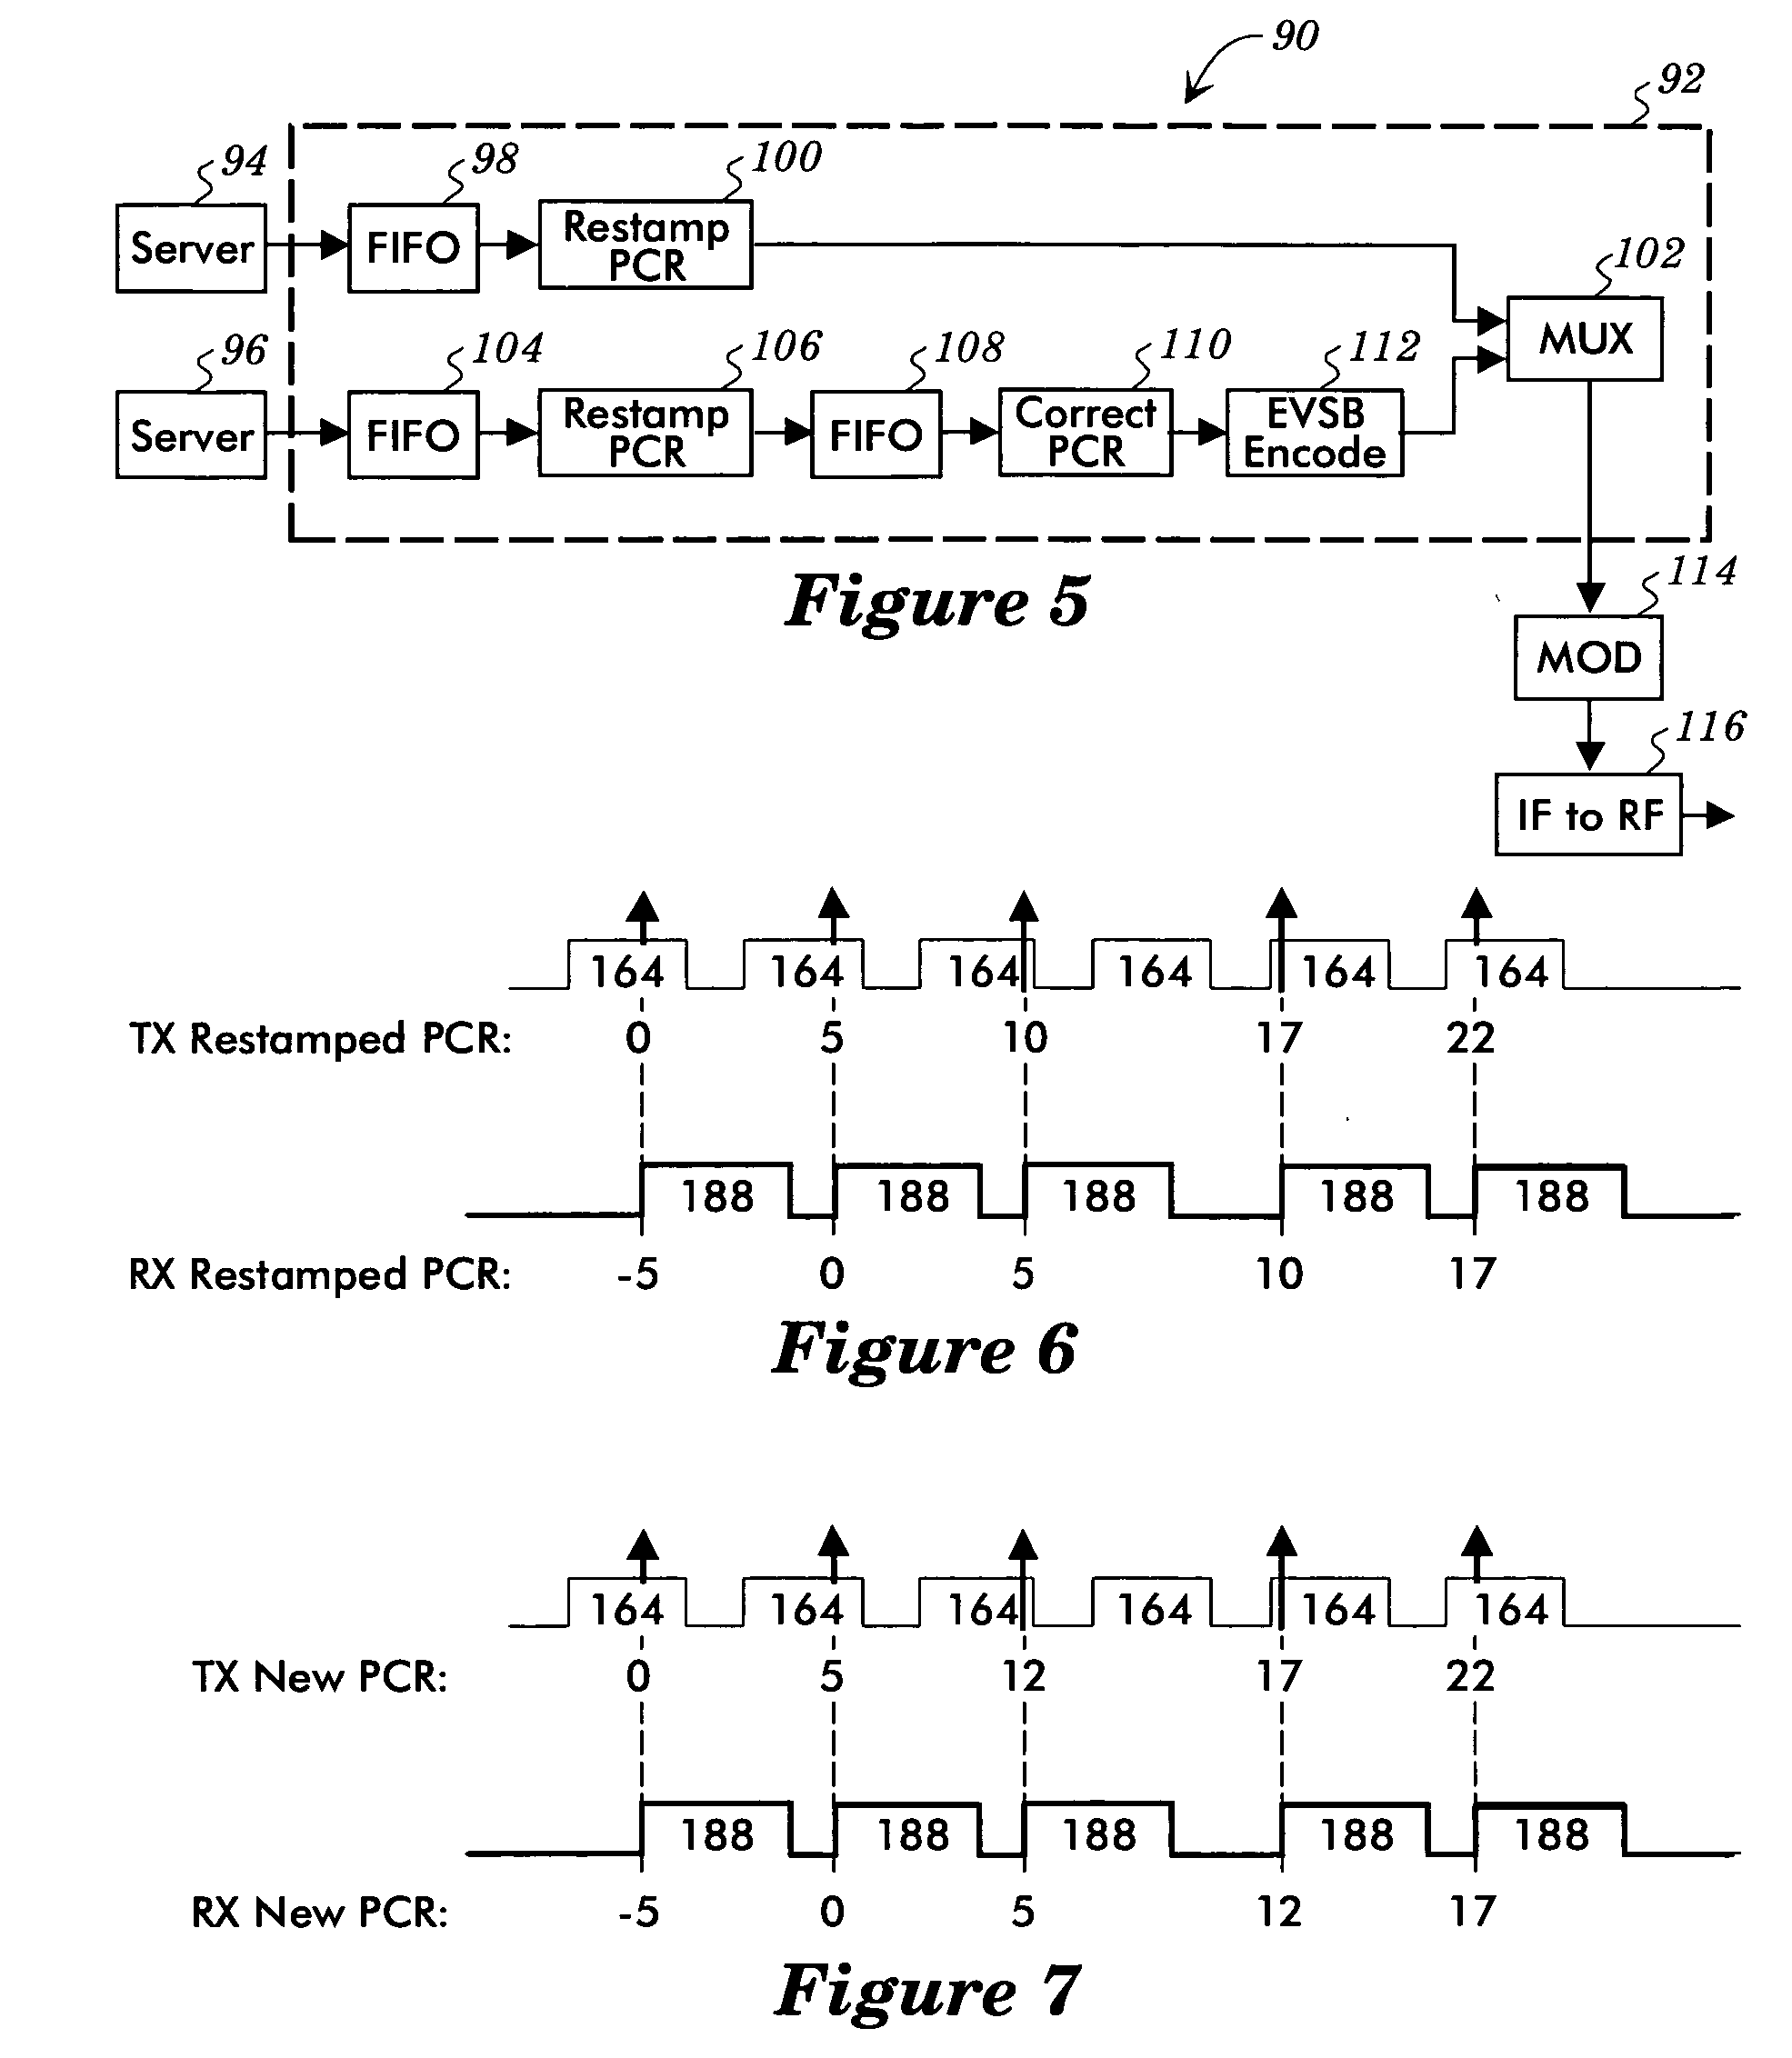 PCR jitter reduction in a VSB and/or EVSB multiplexer system